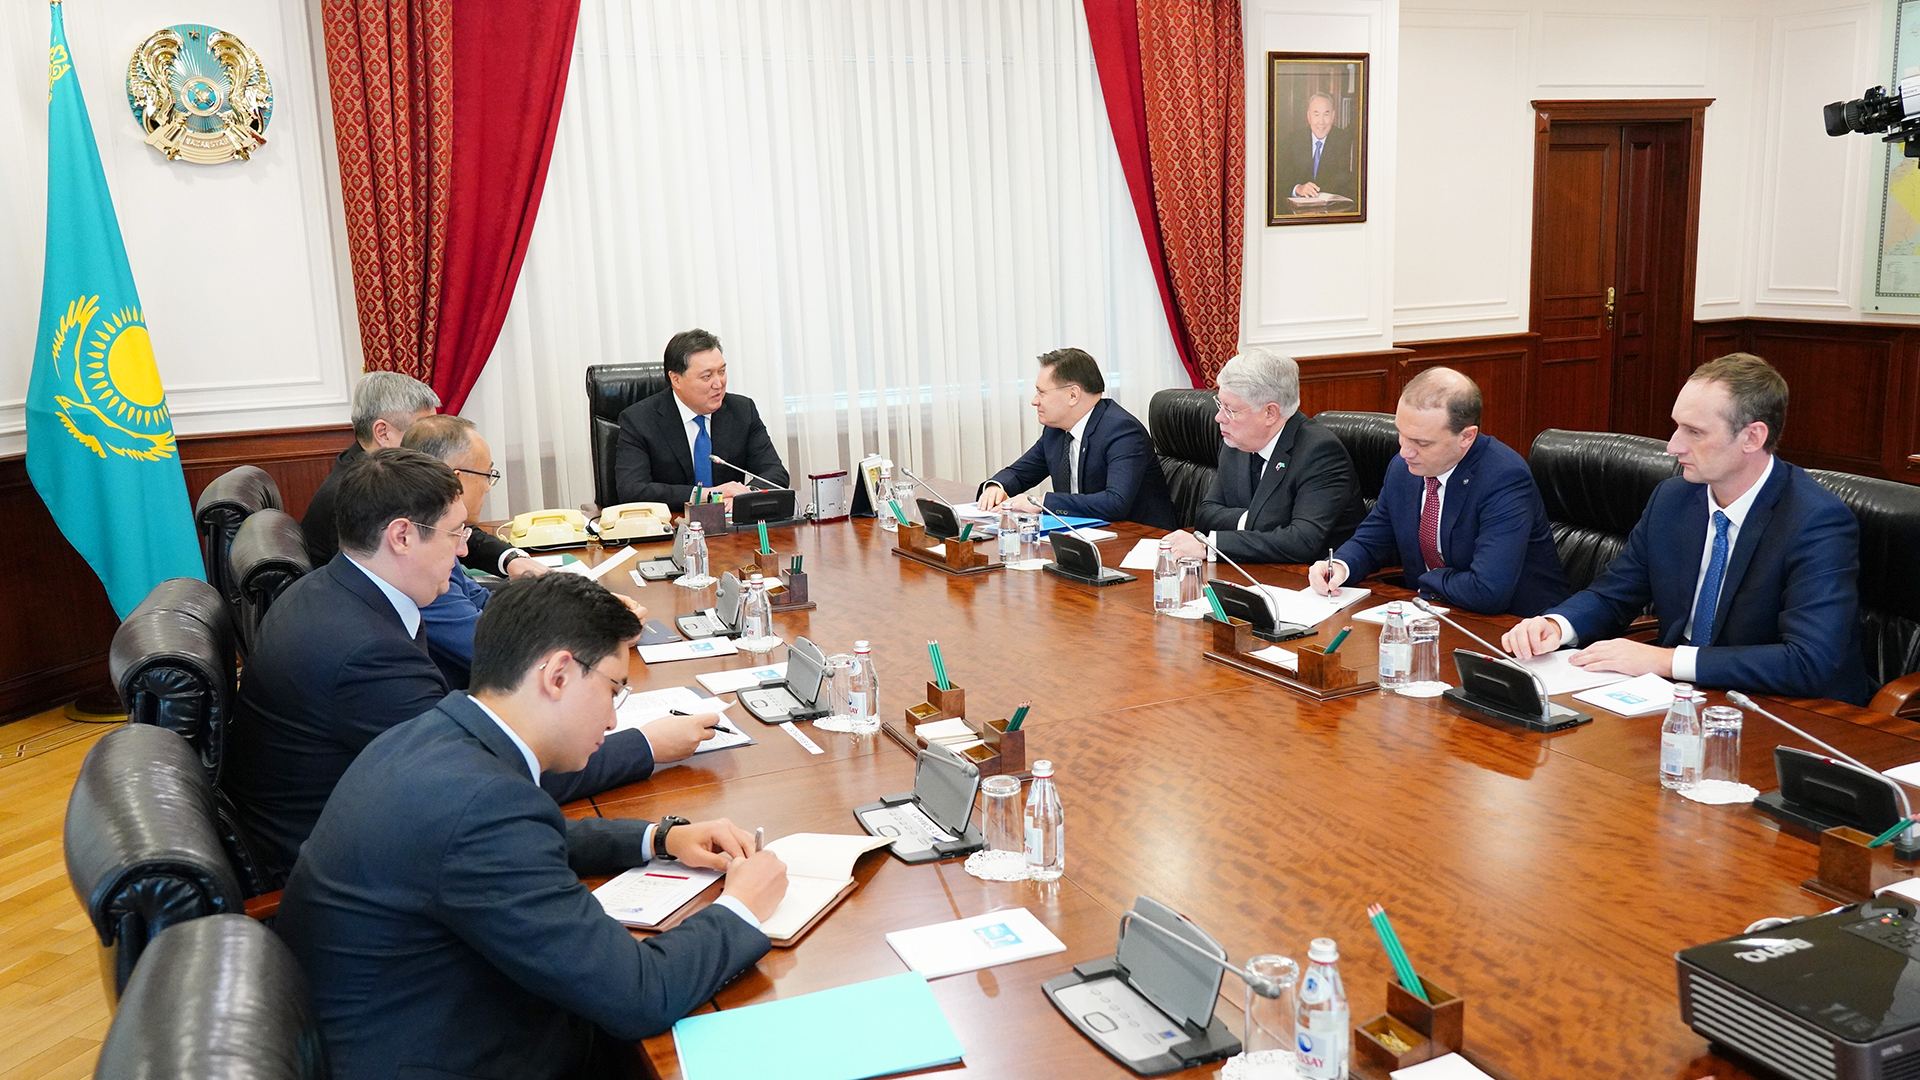 Prime Minister receives Head of Rosatom State Corporation Alexey Likhachev